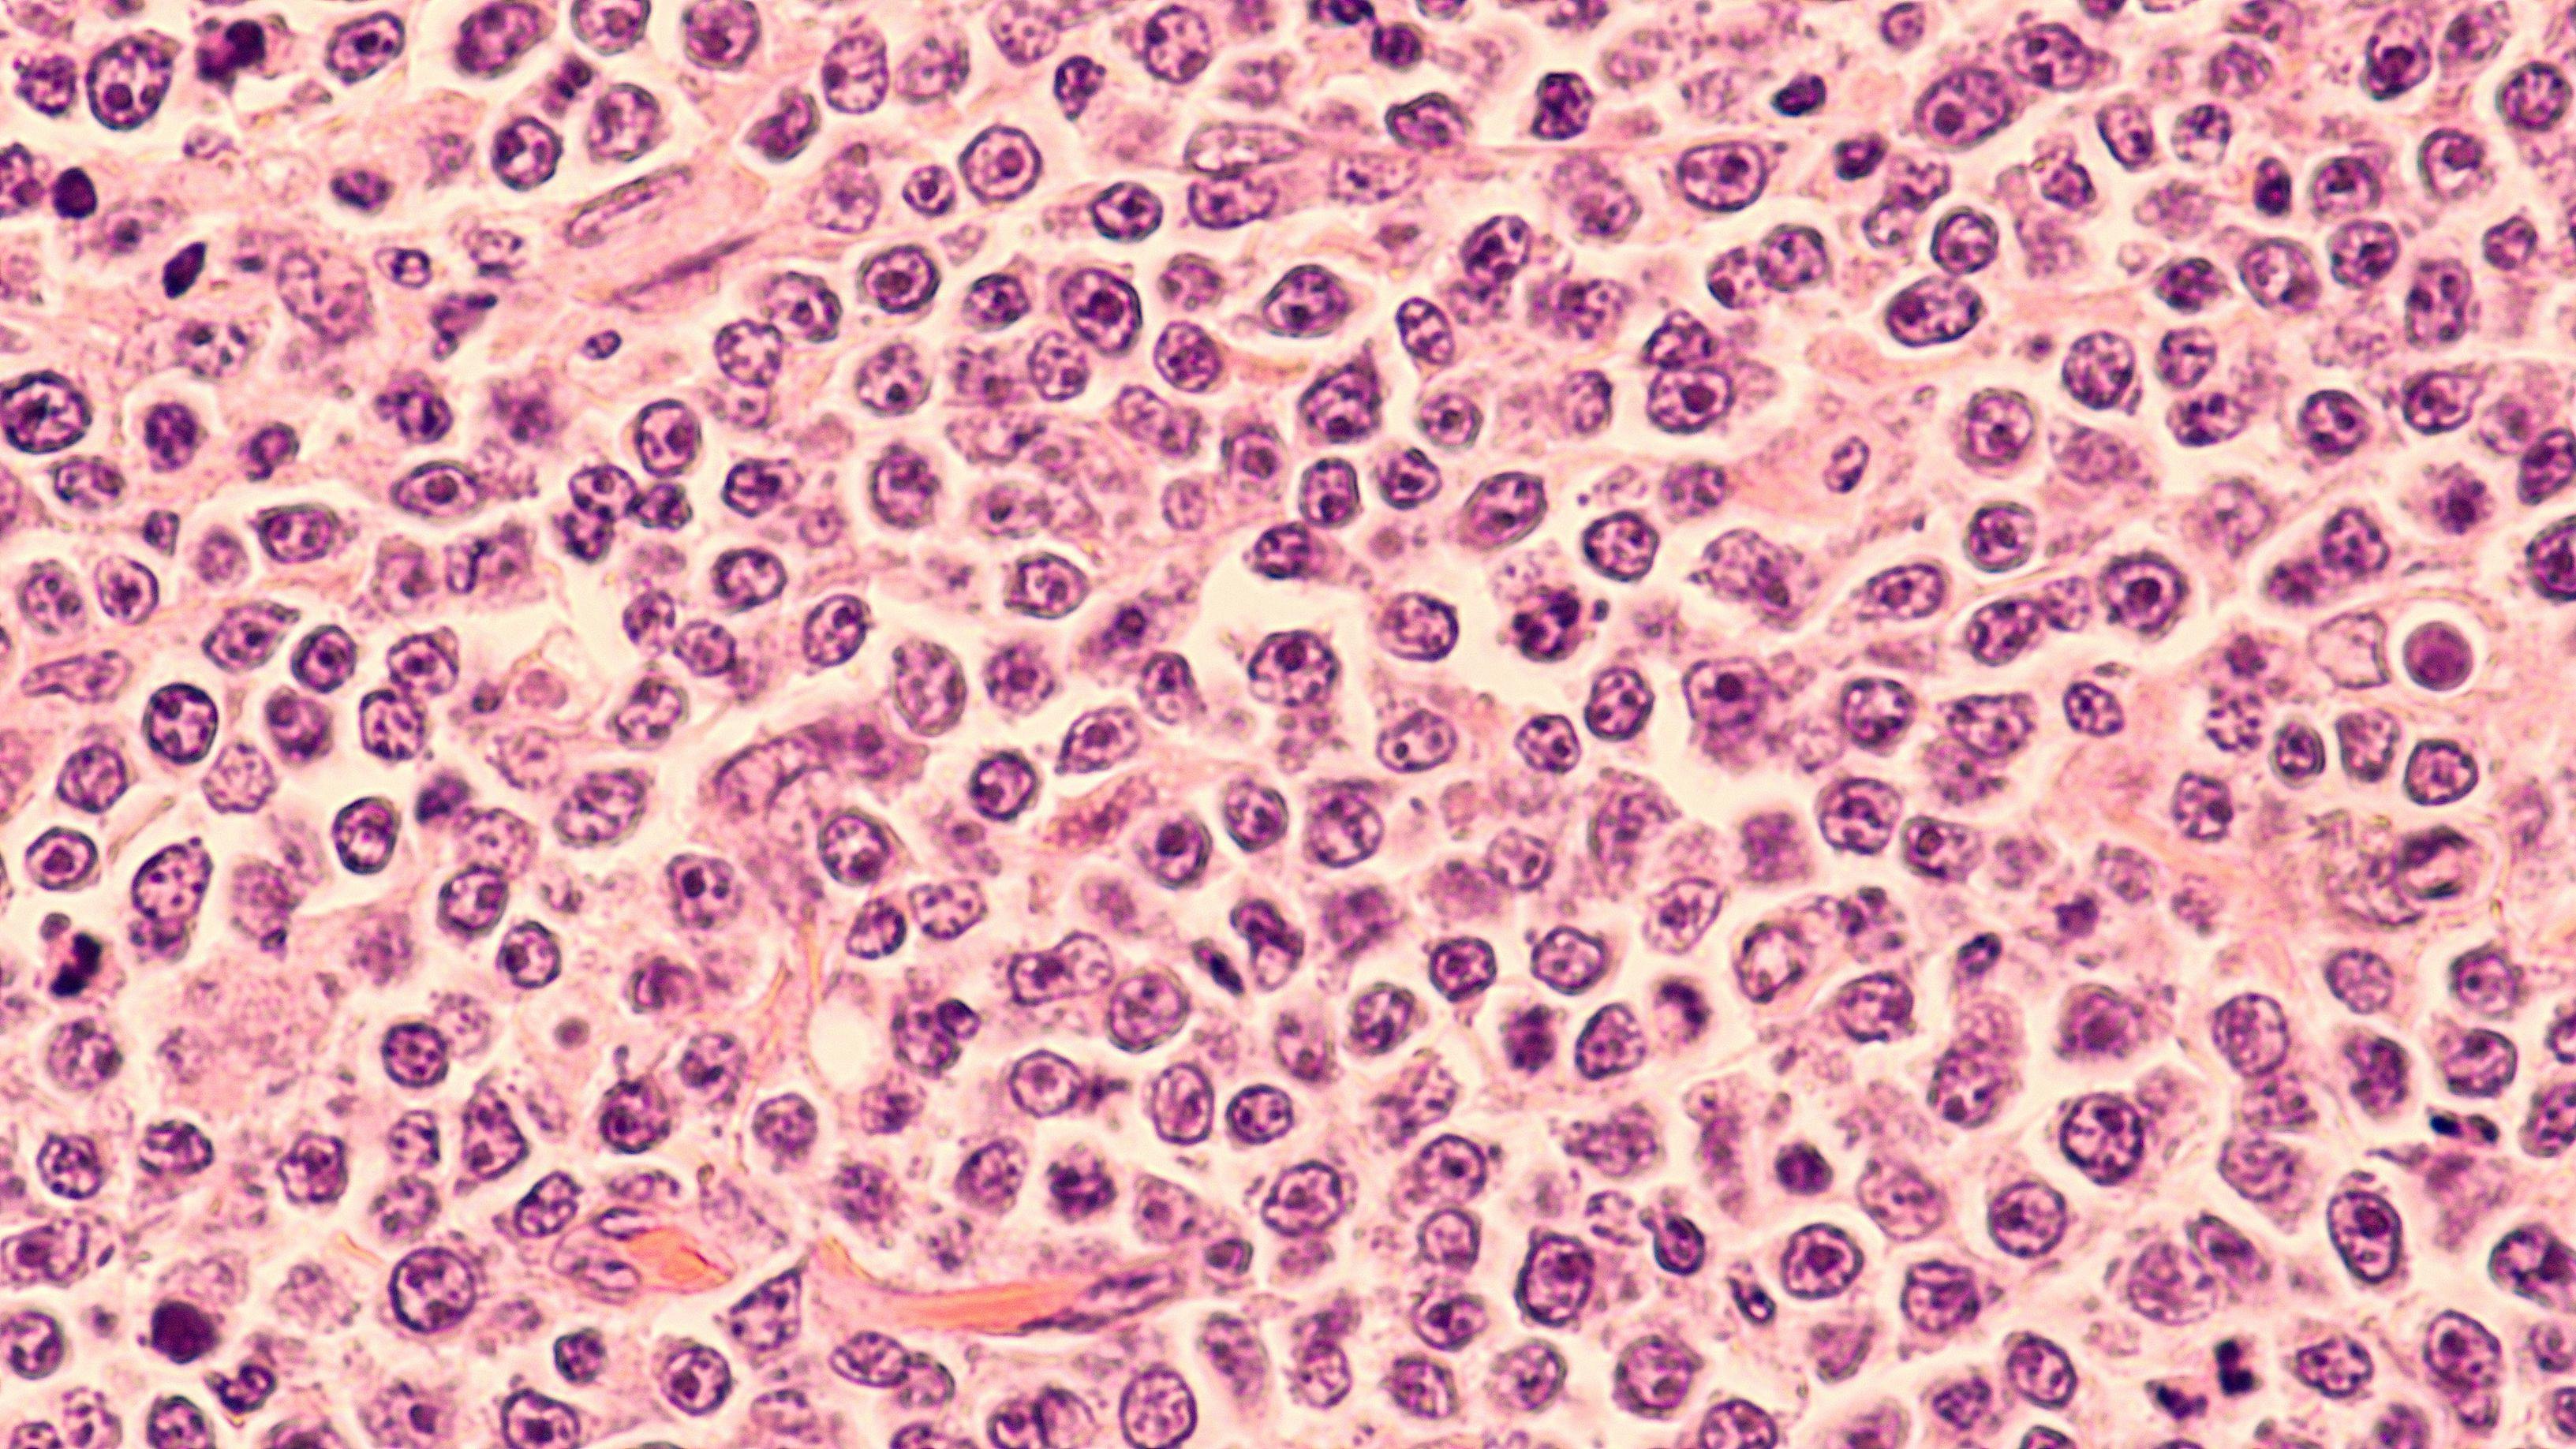 Photomicrograph of a diffuse large B-cell lymphoma (DLBCL) a type of non-Hodgkin lymphoma.